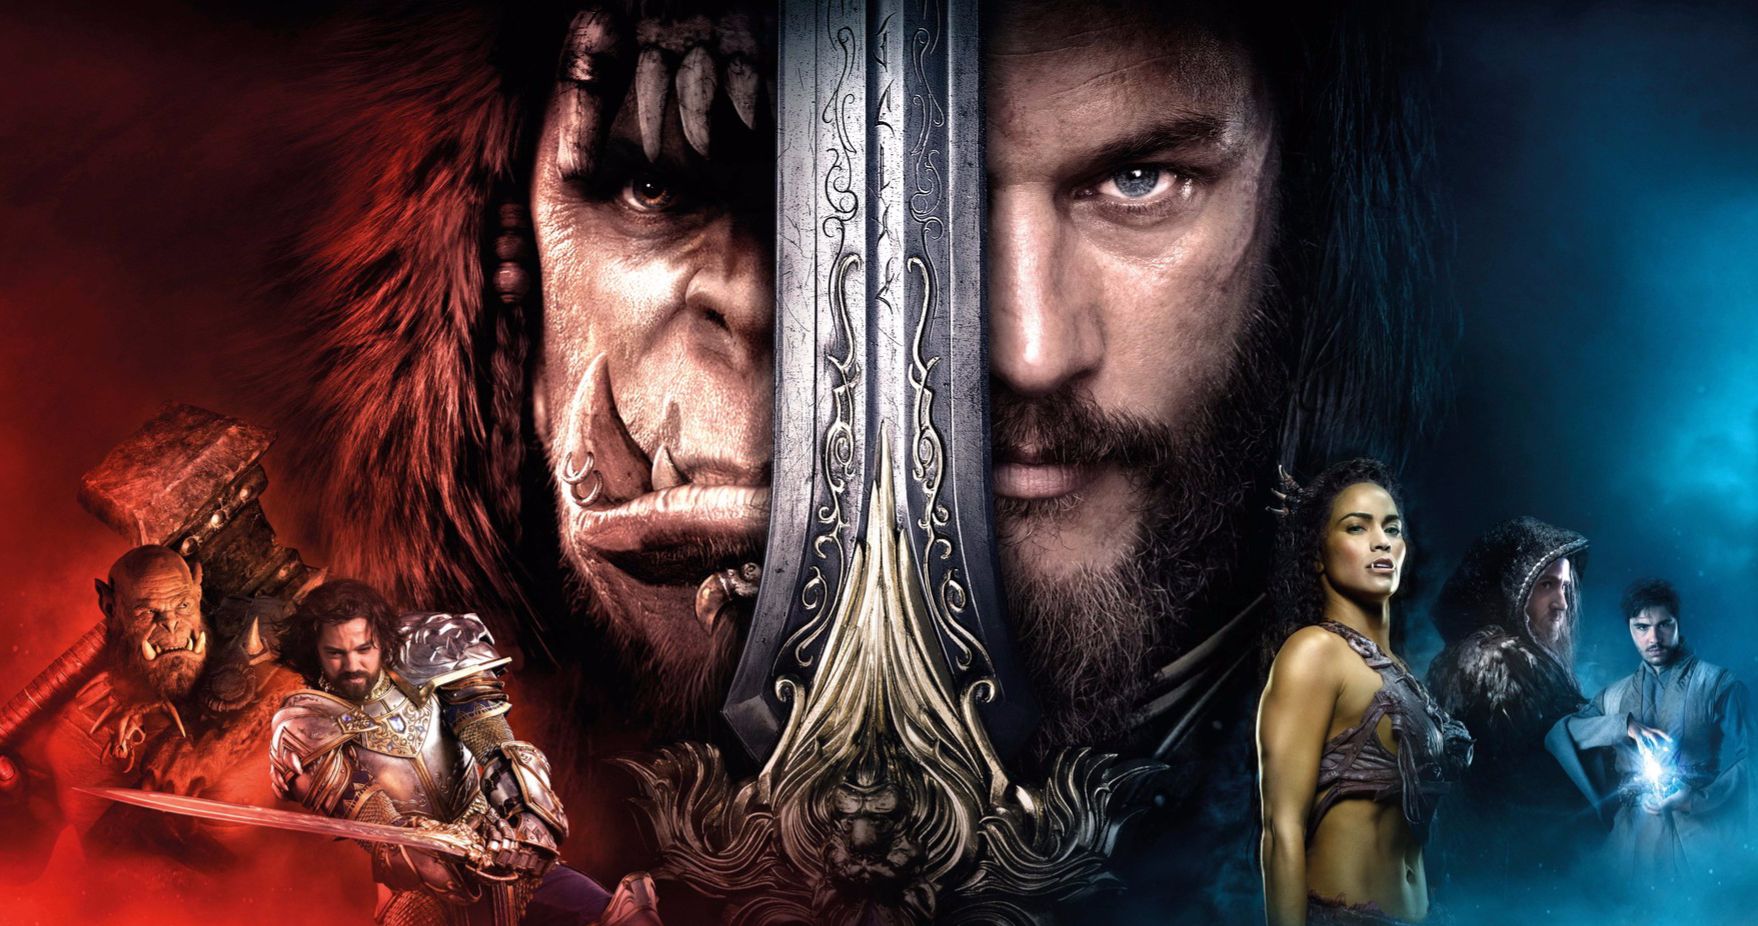 A Warcraft Series Is Coming to Netflix